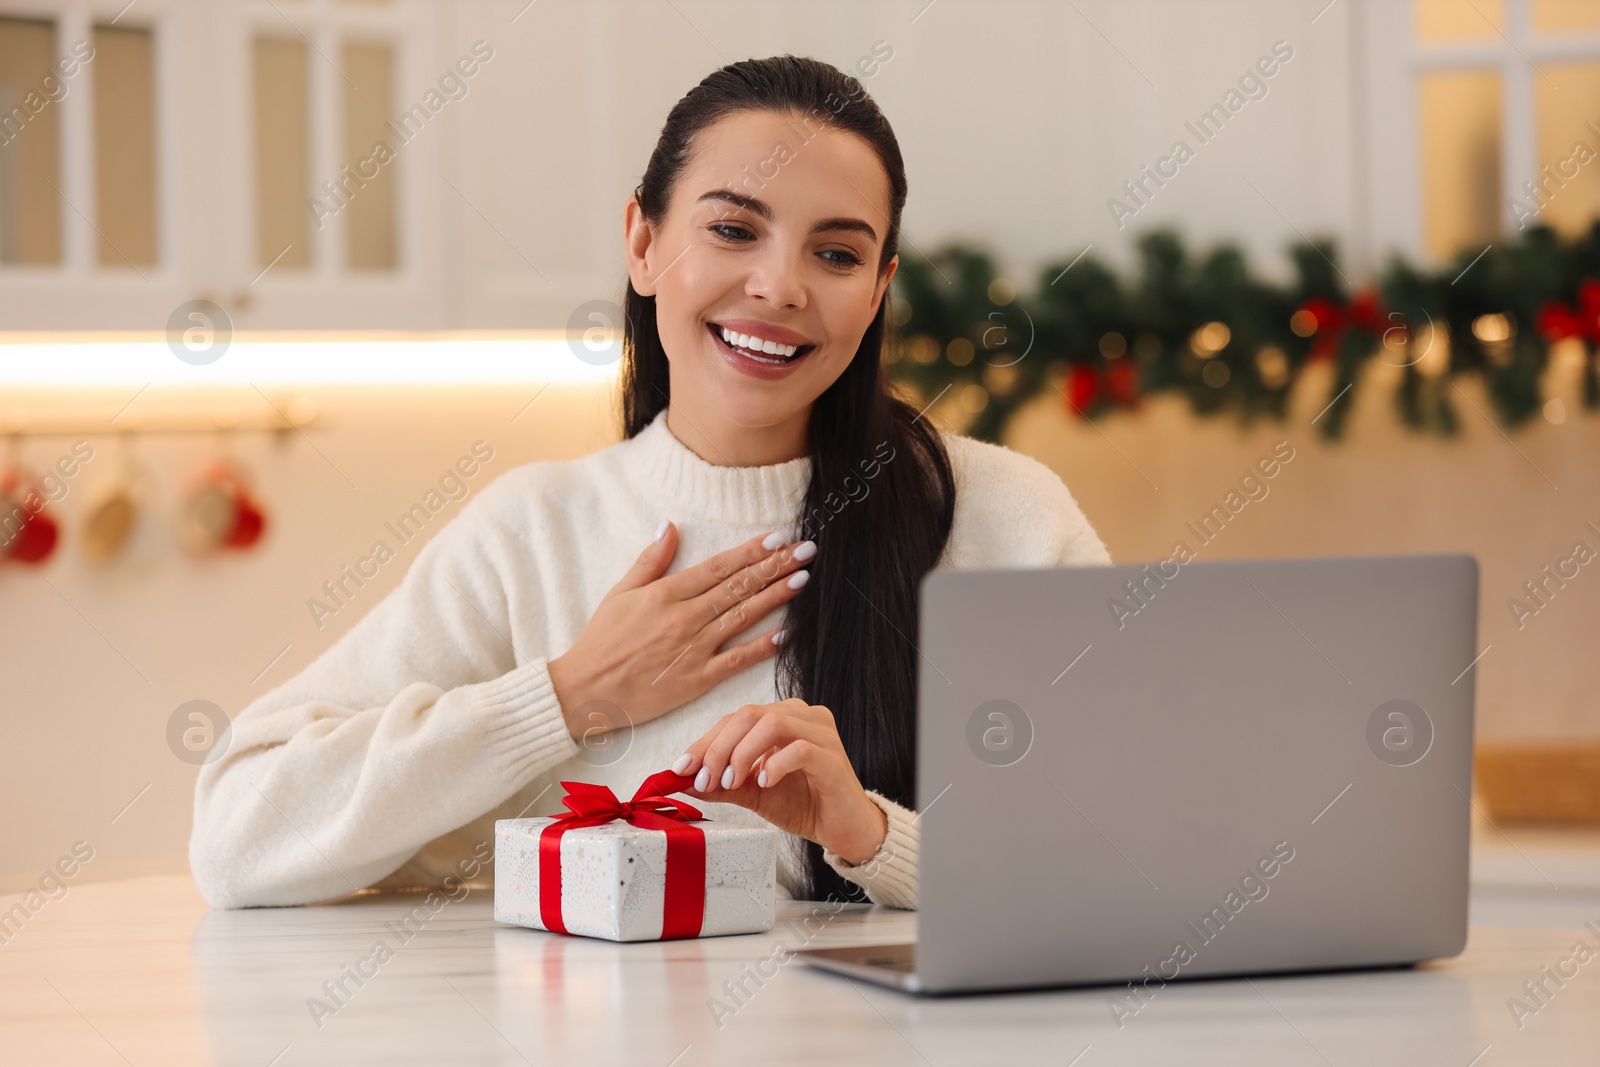 Photo of Celebrating Christmas online with exchanged by mail presents. Smiling woman thanking for gift during video call at home